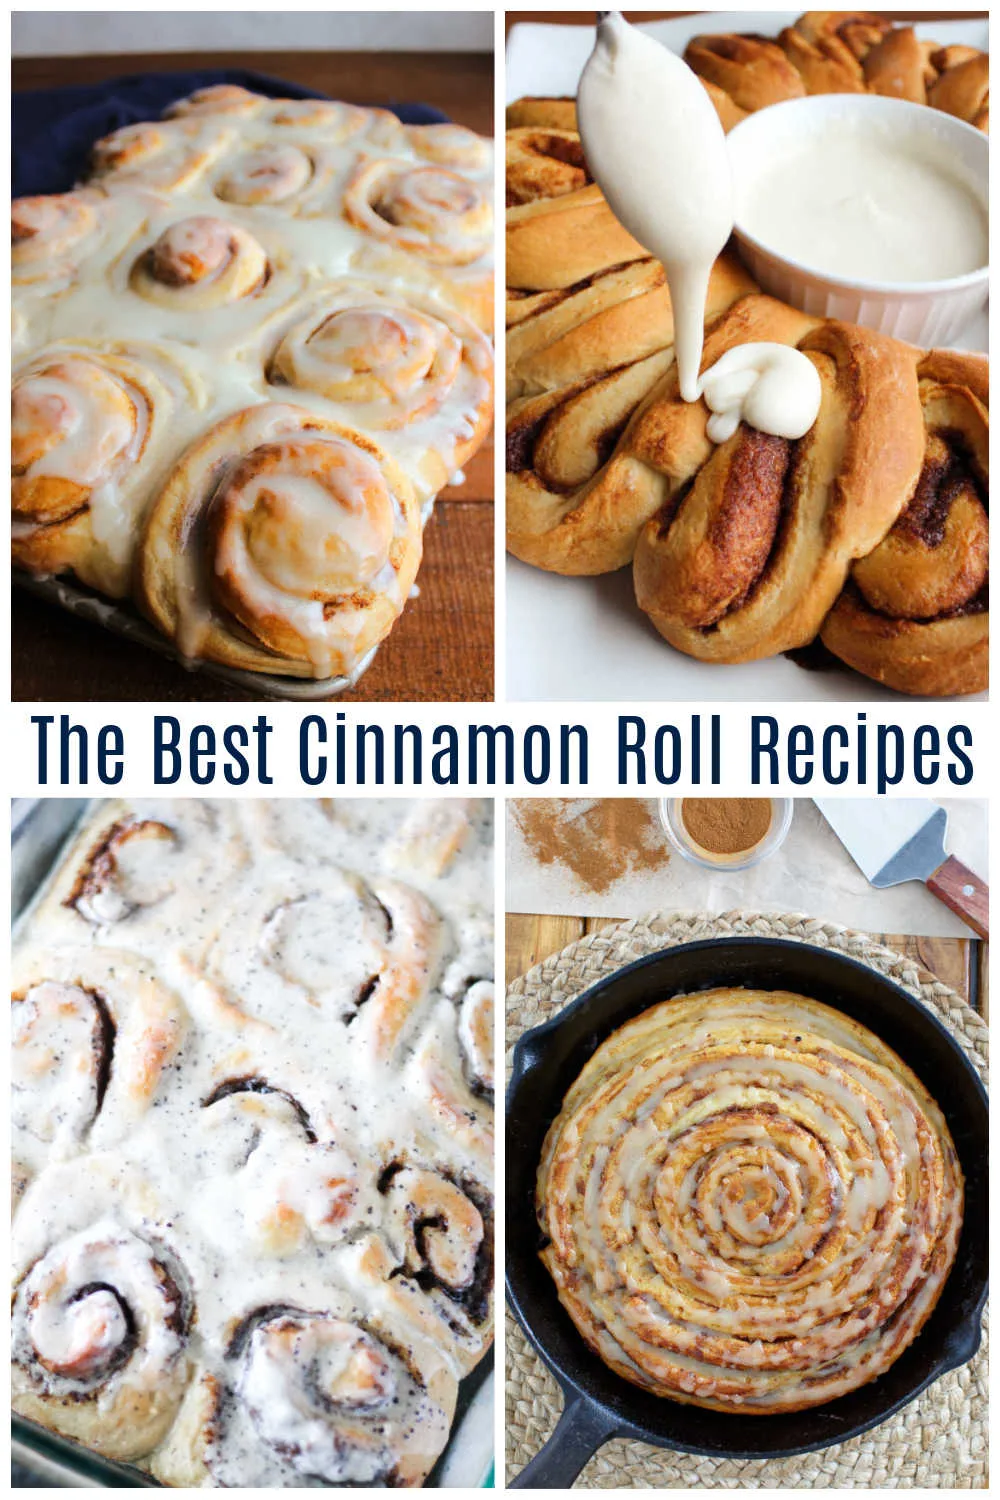 Start your day off right with one of these delicious cinnamon roll recipes. They will take any ordinary breakfast or brunch and make them spectacular! 